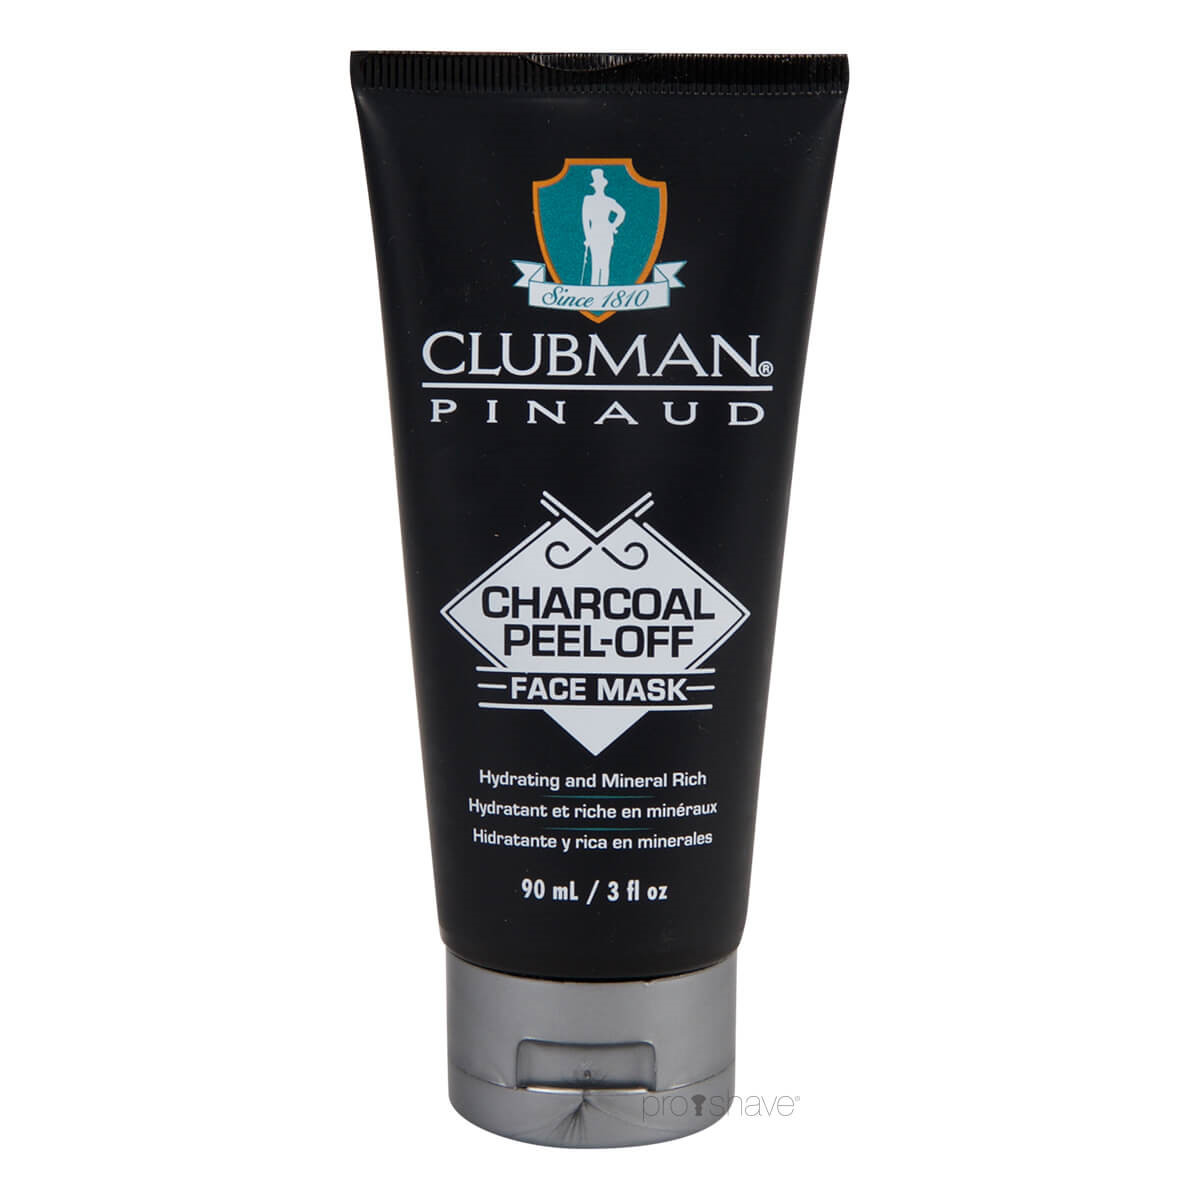 Billede af Pinaud Clubman Charcoal Peel-Off Face Mask, 90 ml.